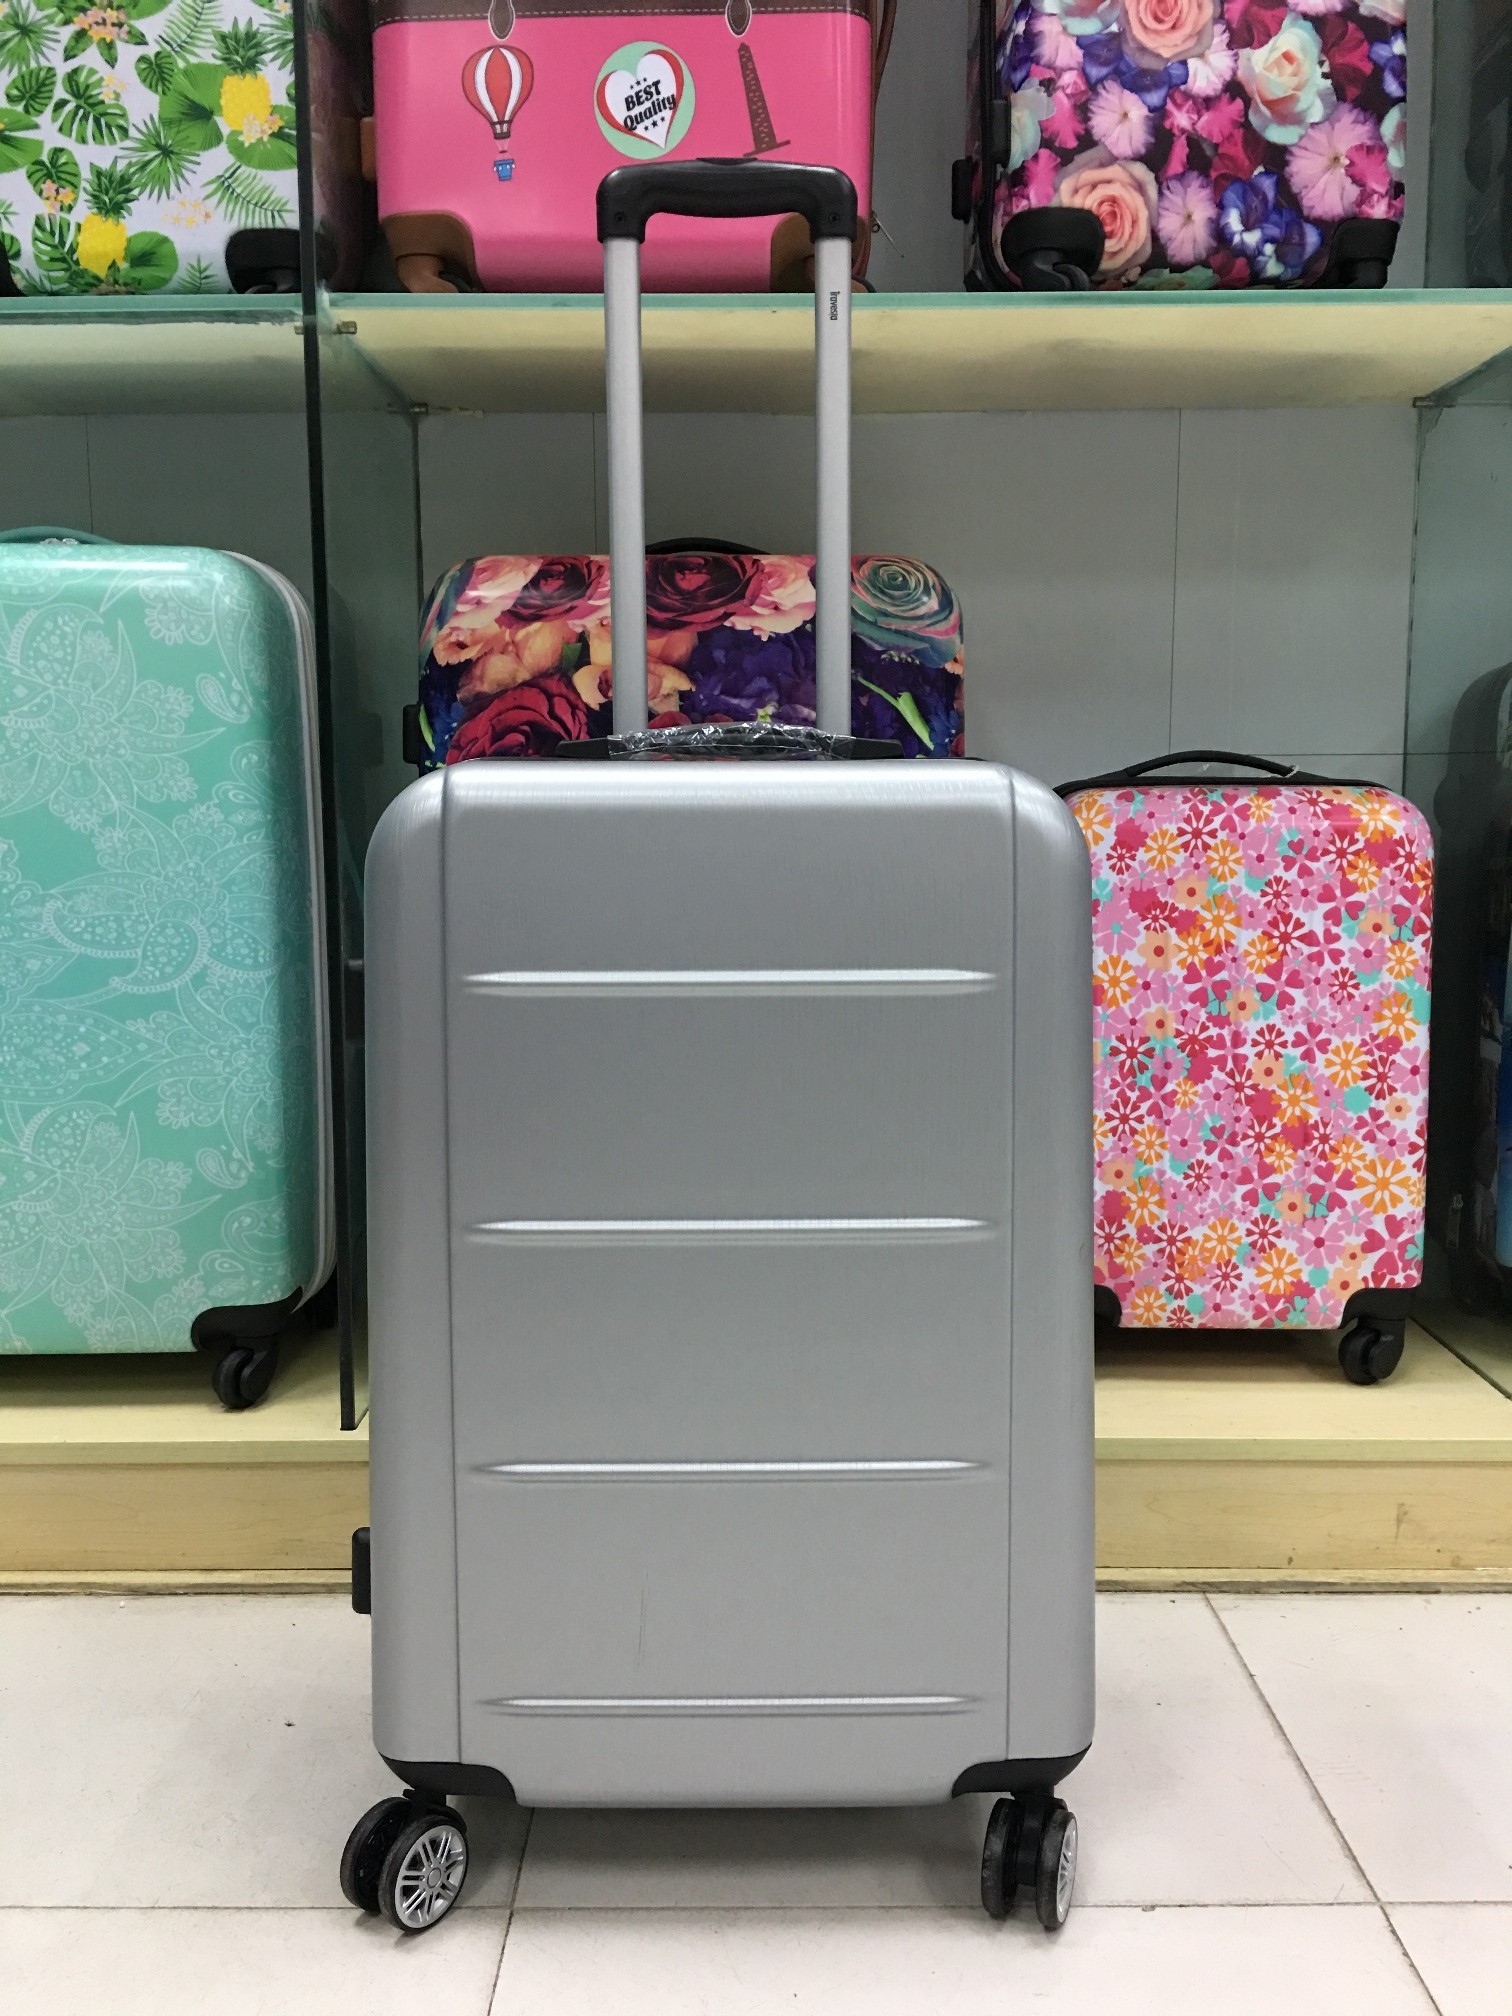 yanteng classic super light PC luggage in grey color